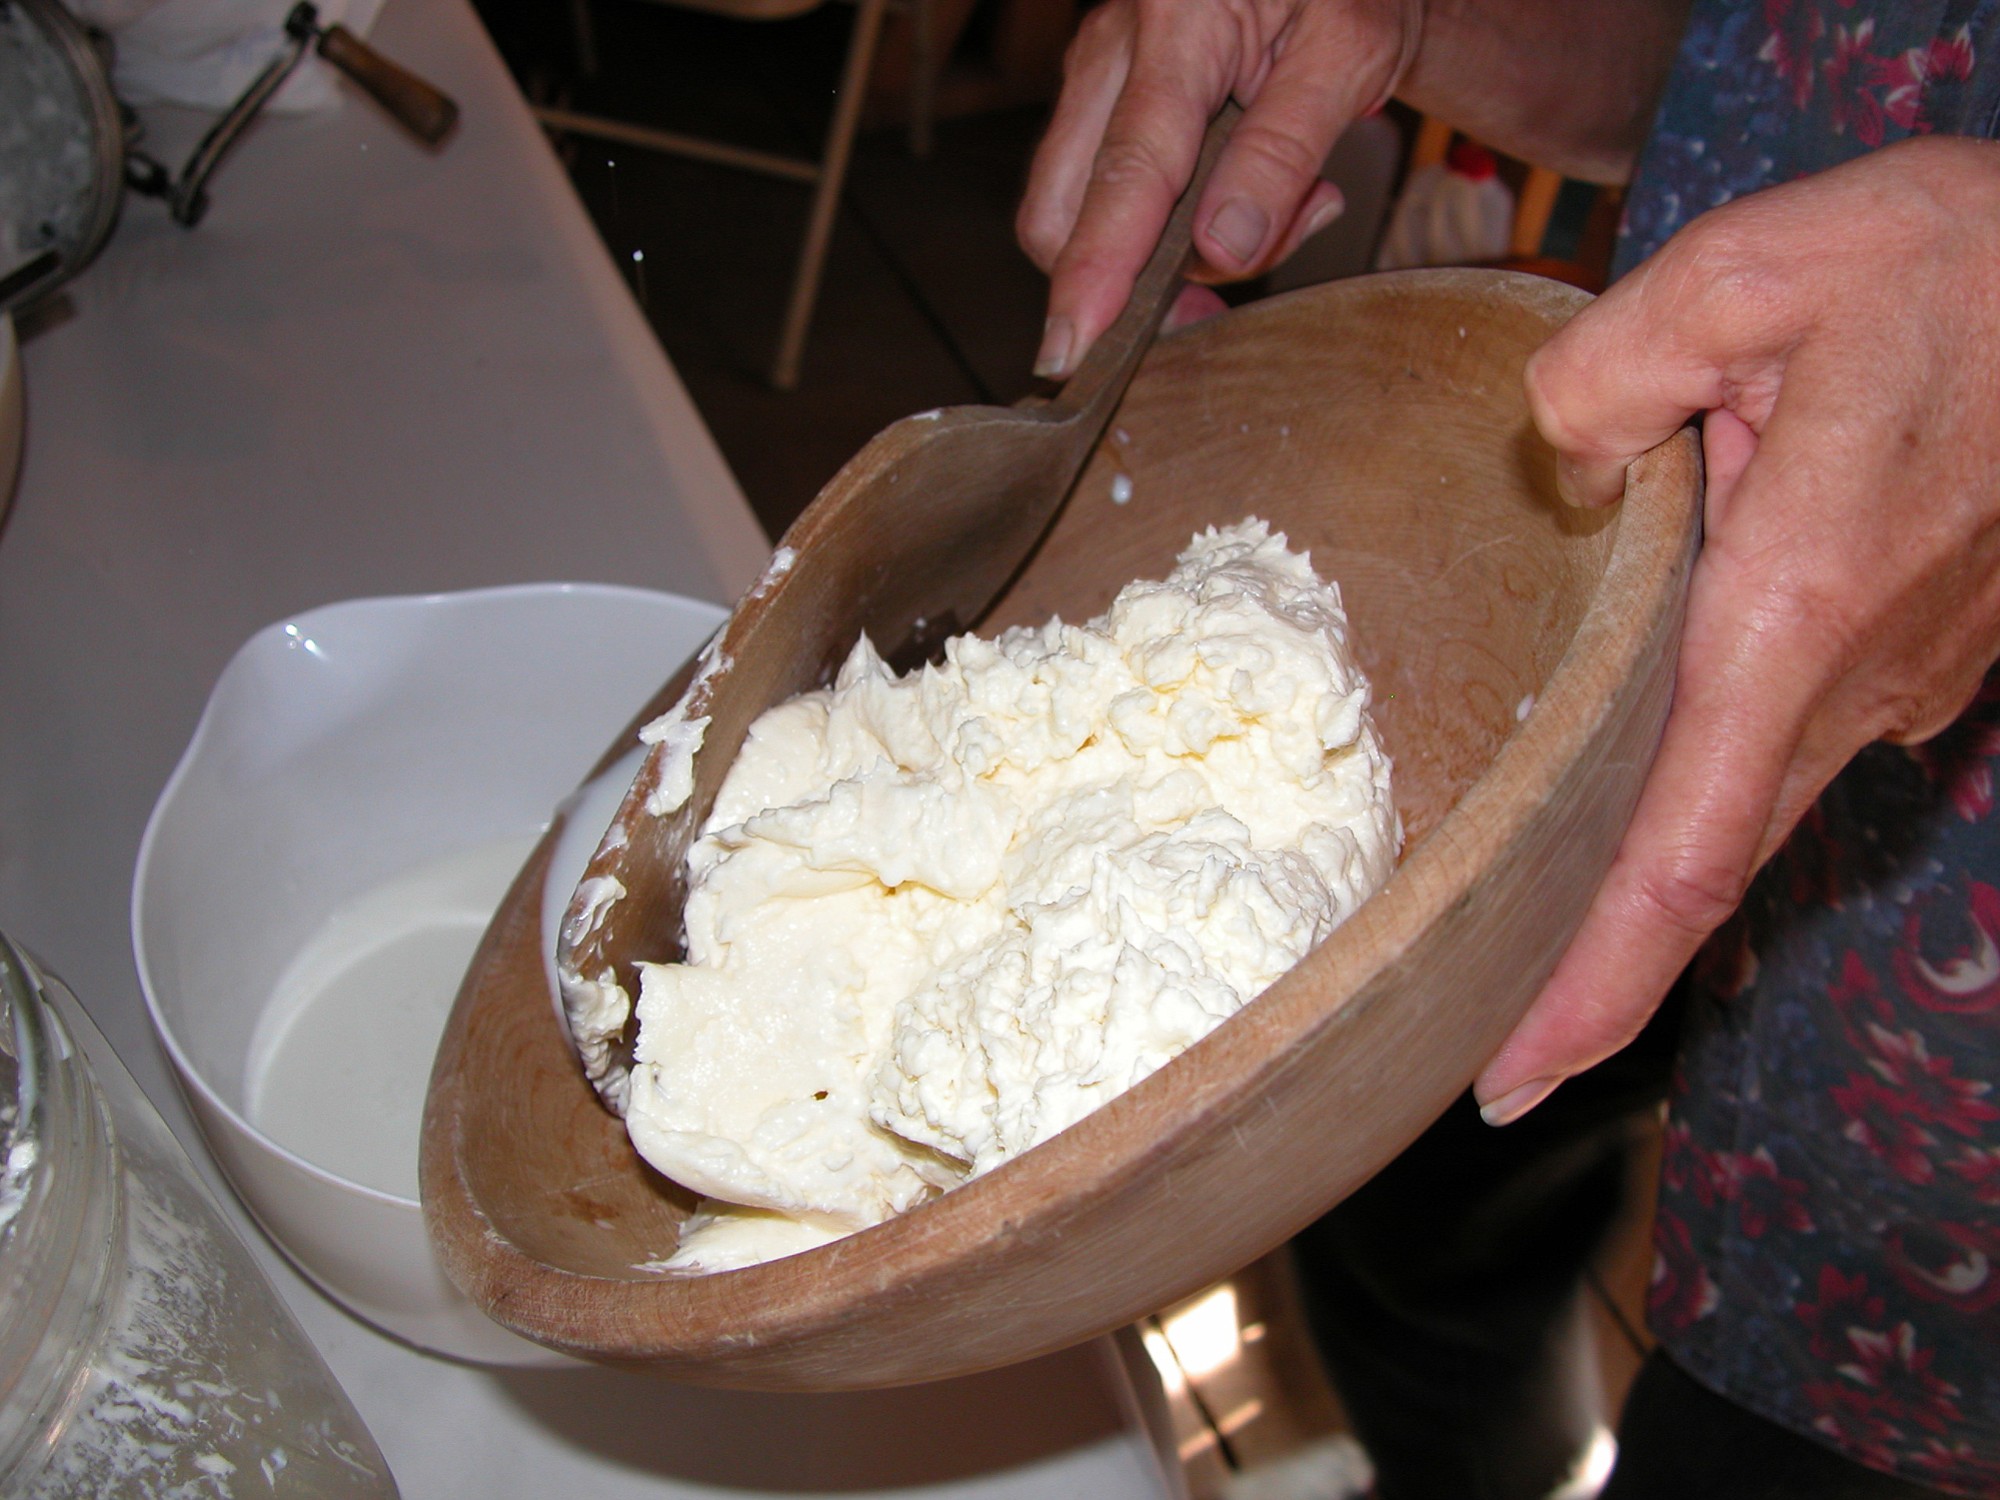 Hand churned butter and freshly made bread will be highlighted at the Cedar Creek Grist Mill.